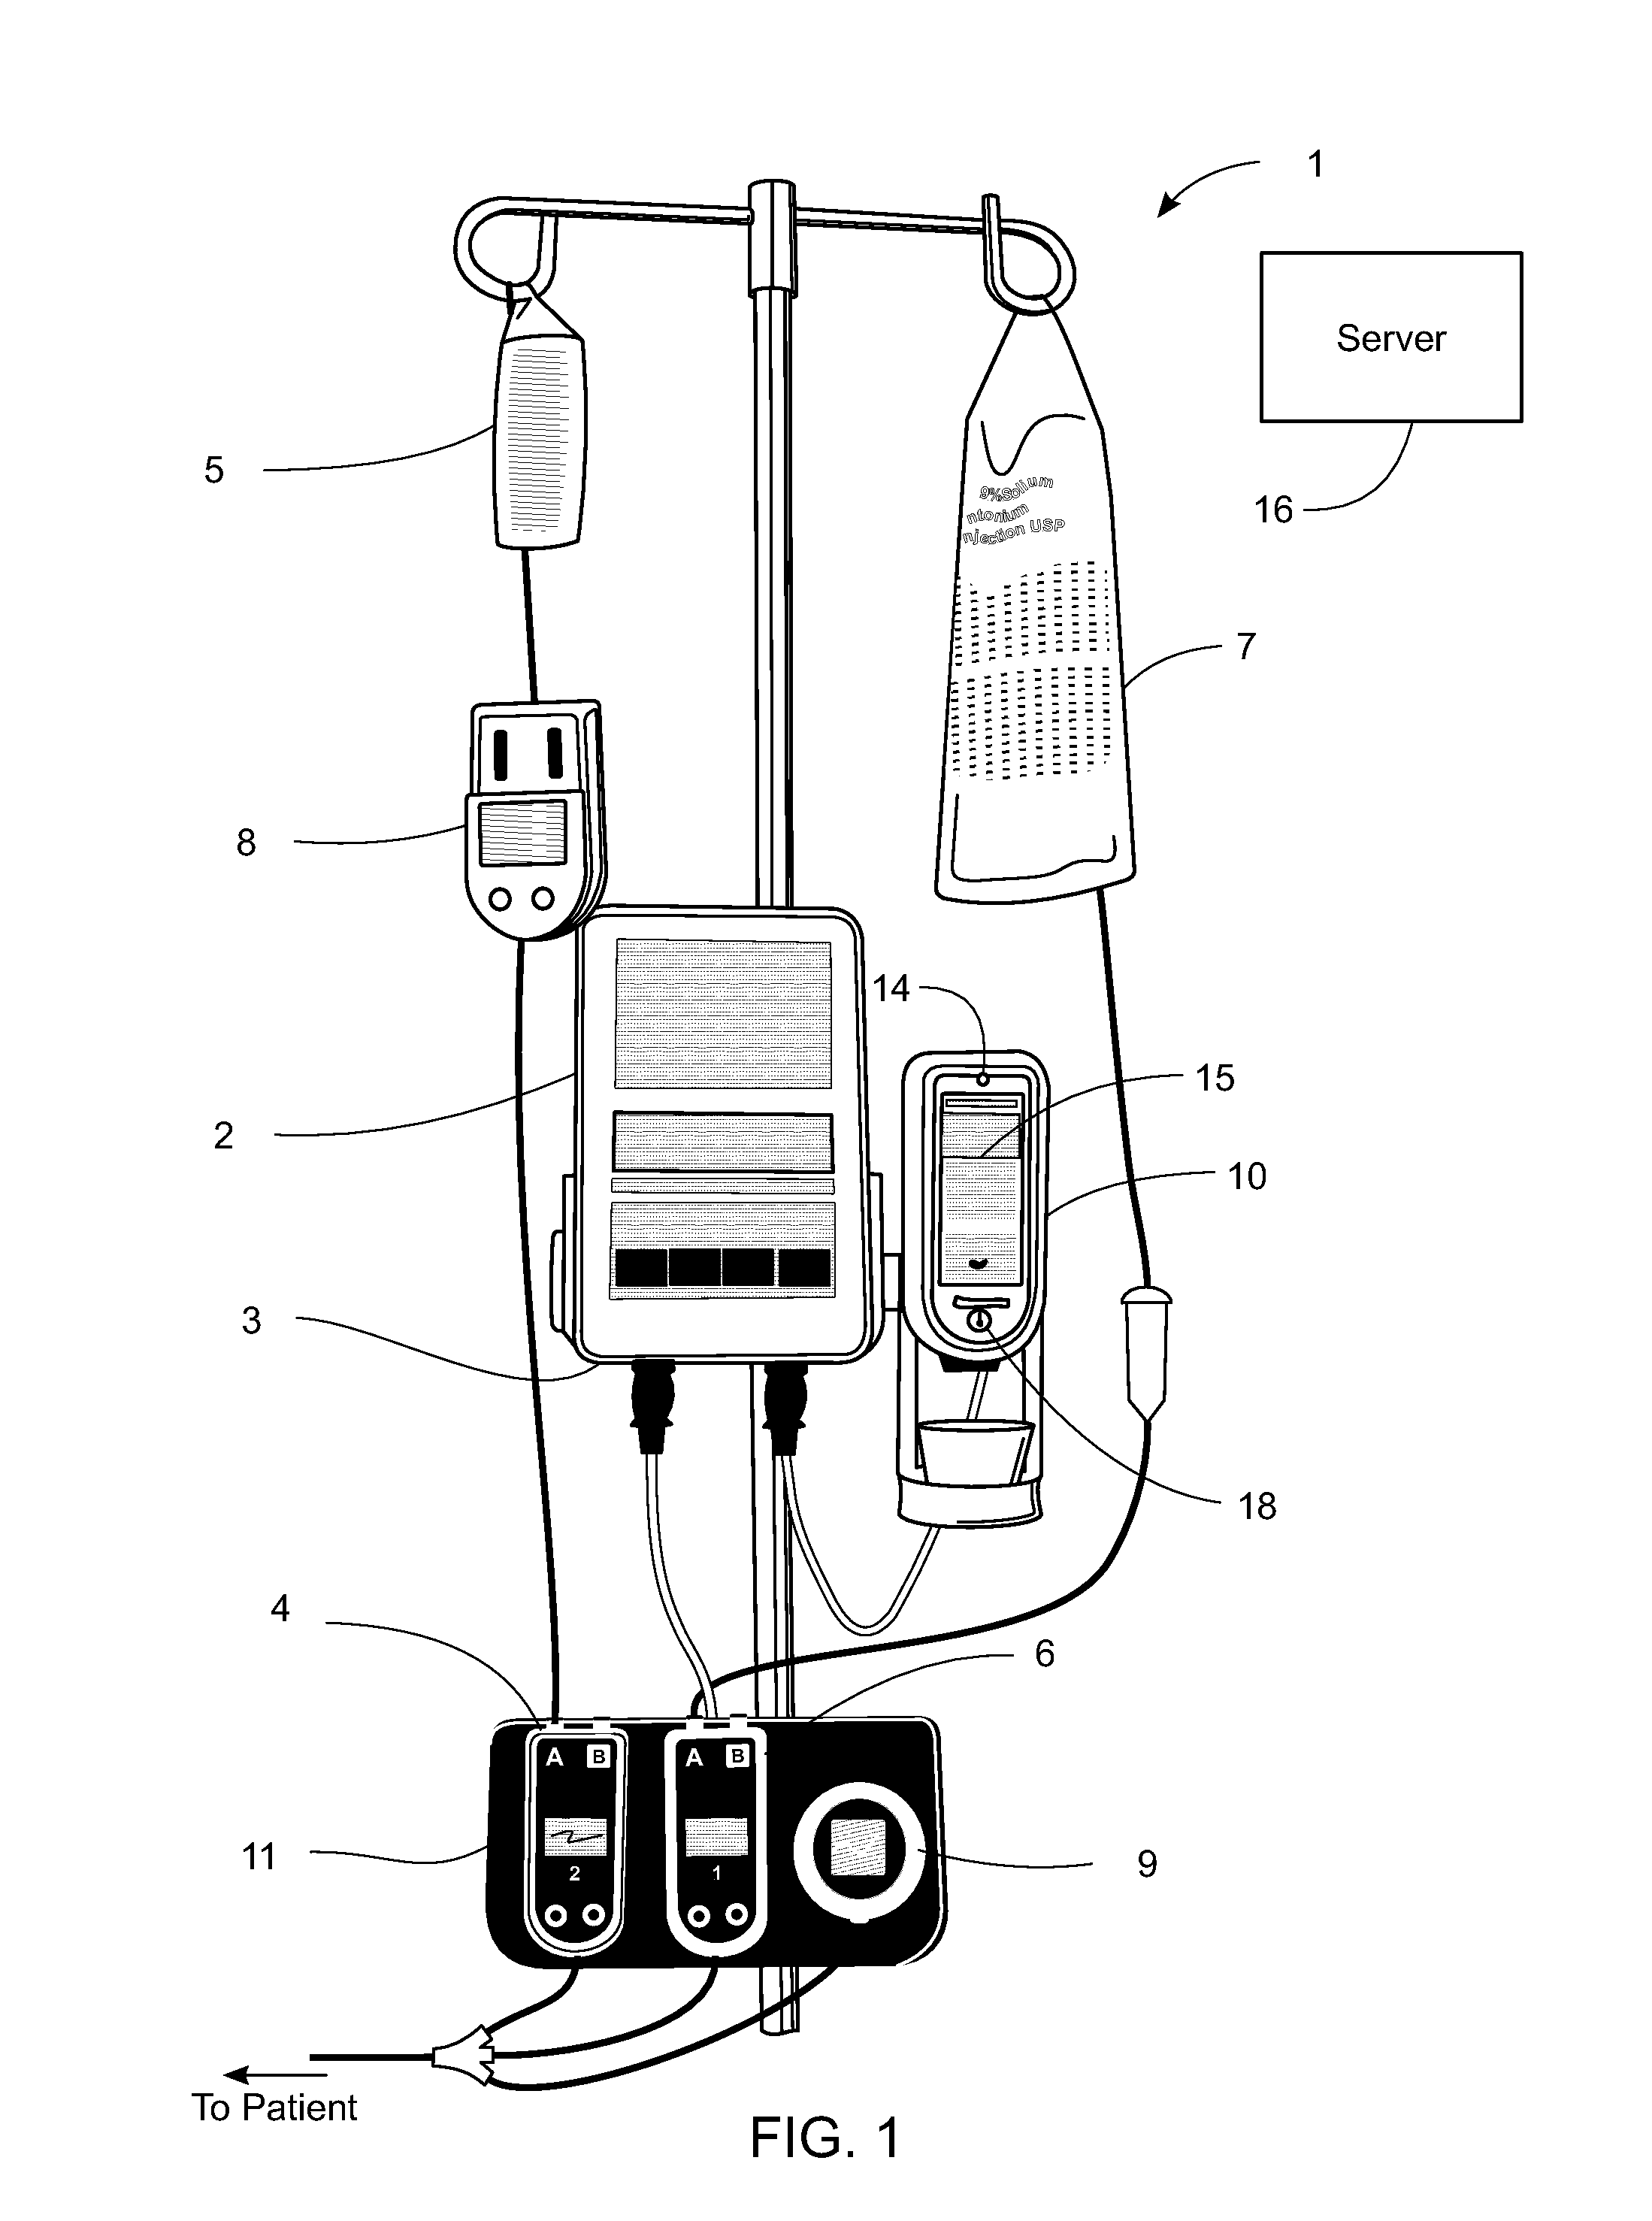 System, Method, and Apparatus for Dispensing Oral Medications